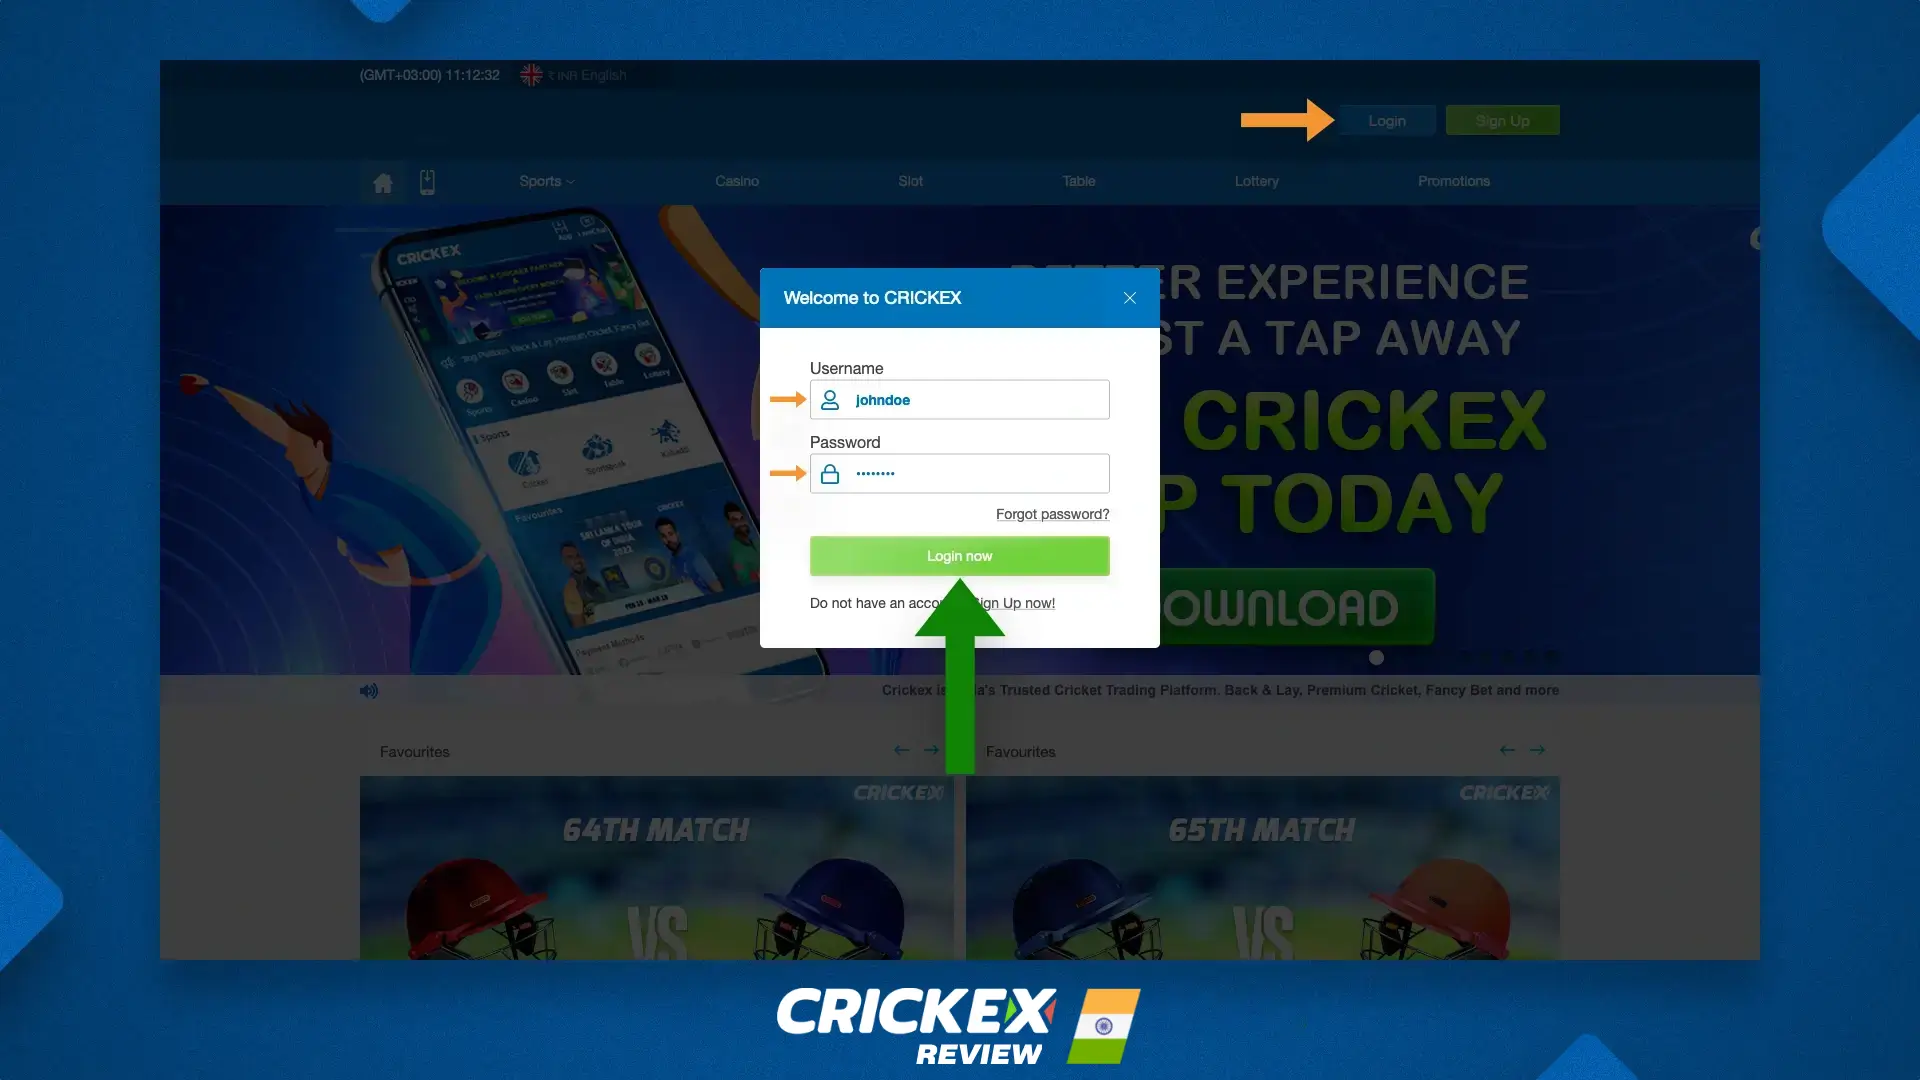 Log in to the Crickex website to access your personal account